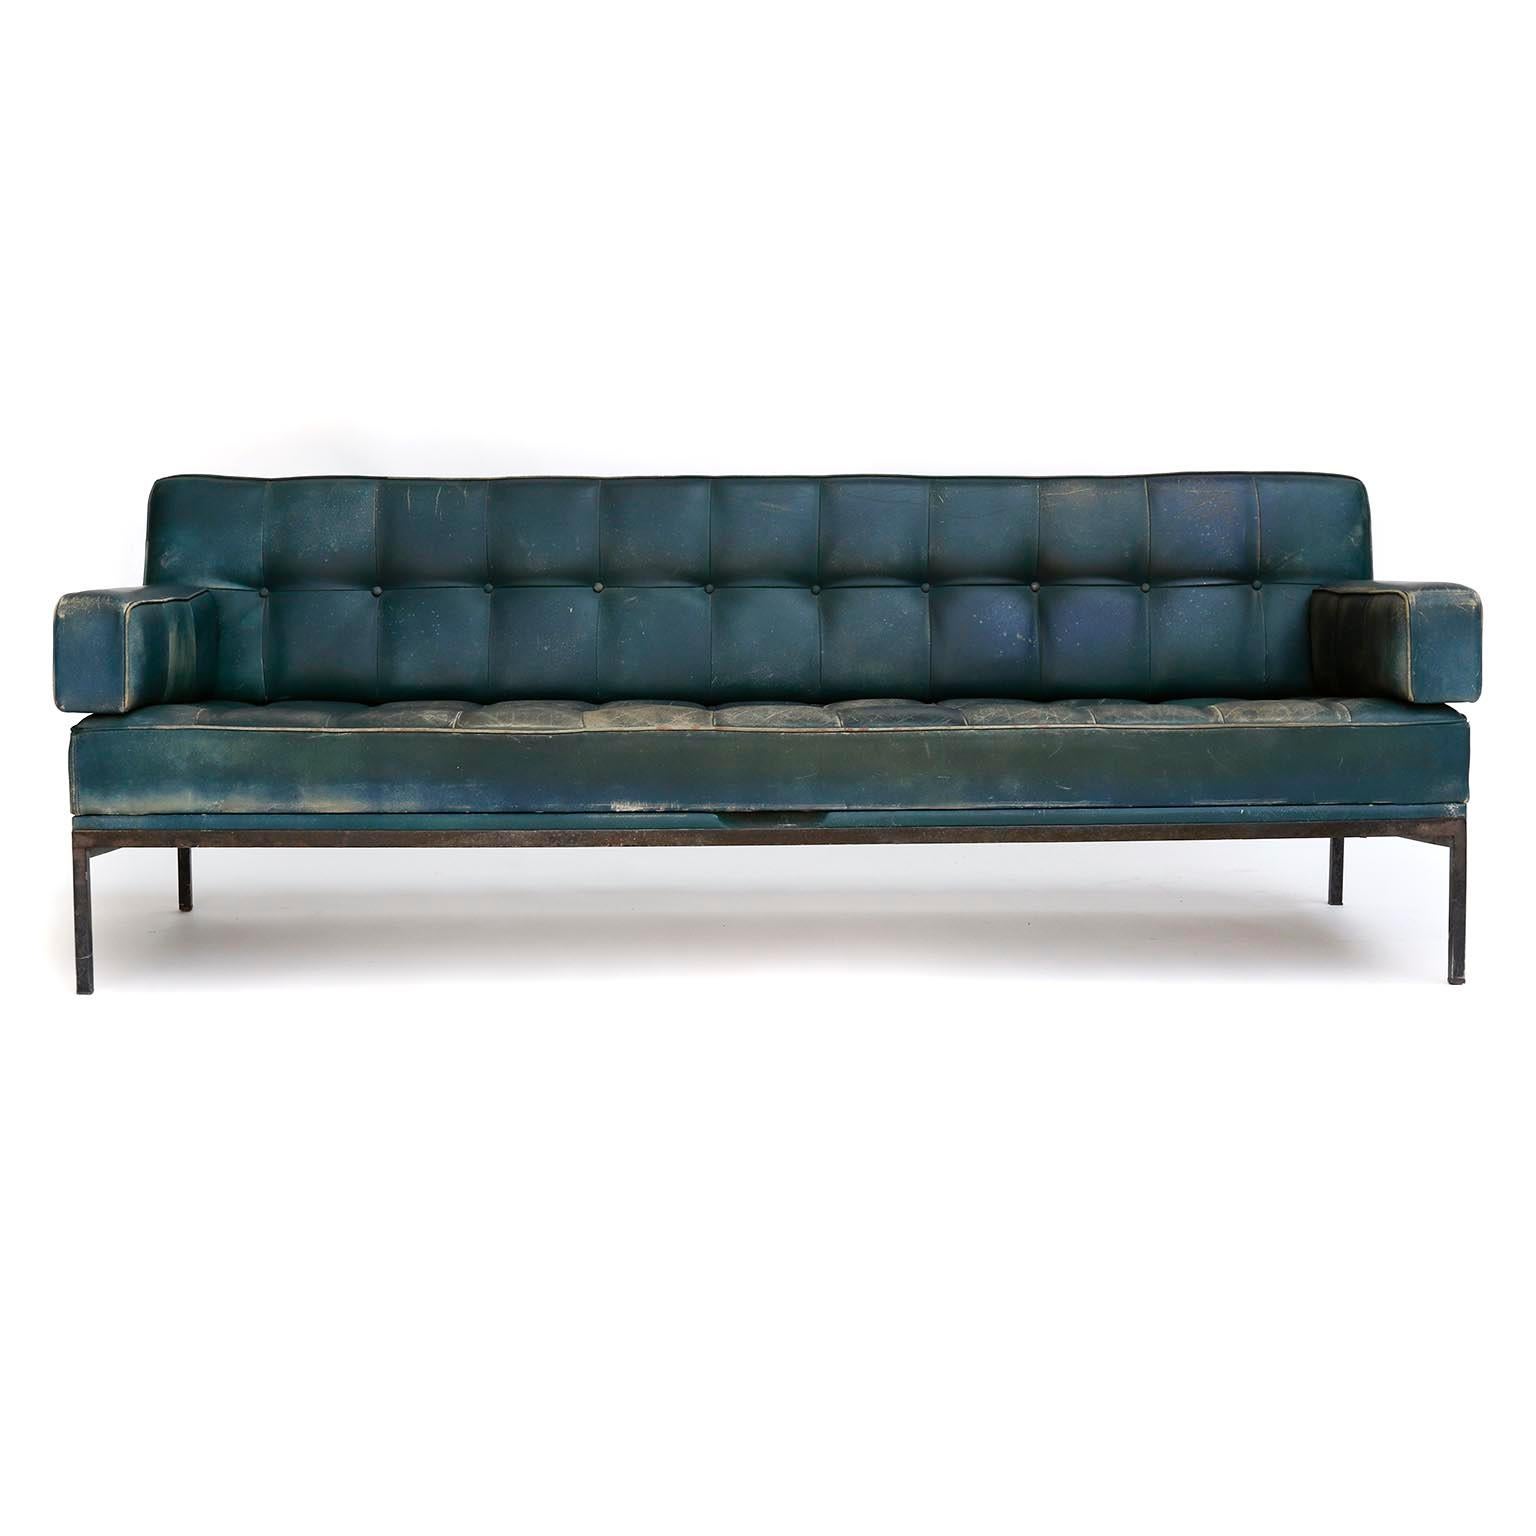 A freestanding tufted sofa named 'Constanze' (engl. Constance) designed by Prof. Johannes Spalt for Wittmann, Austria, manufactured in midcentury. Johannes Spalt designed this convertible daybed in 1961.
This is a rare version with armrests. The